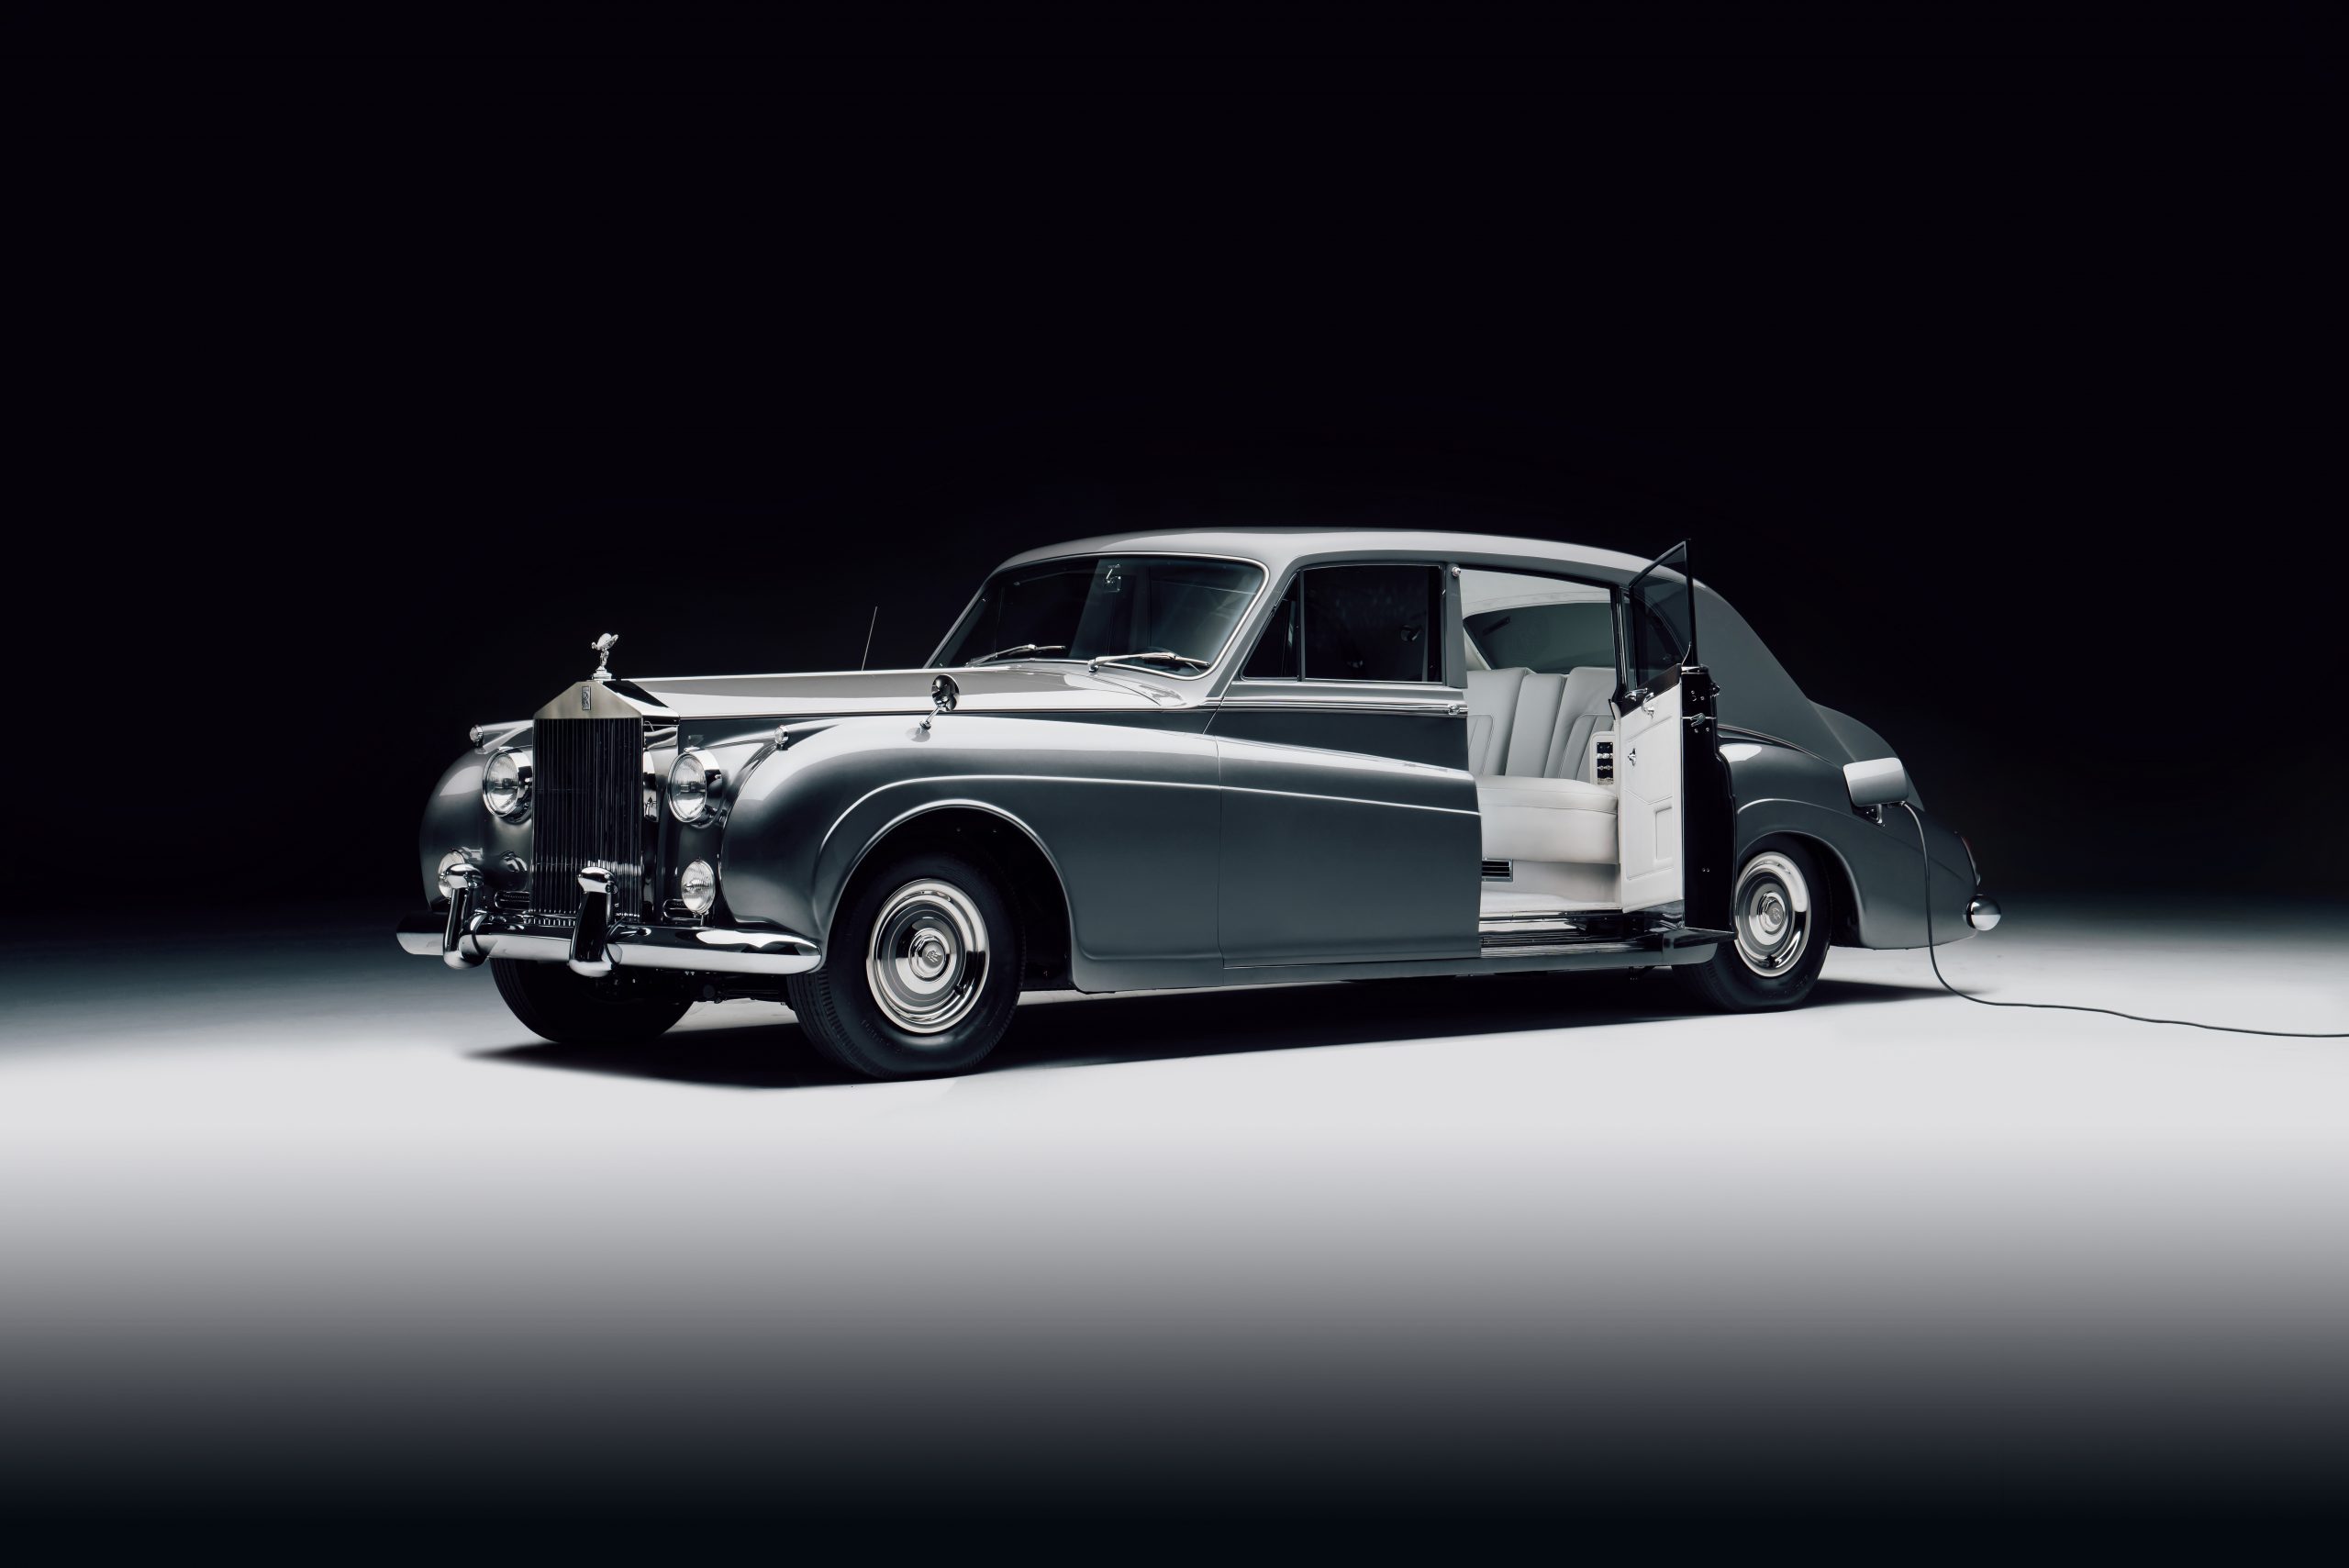 Amped-up Rolls-Royce by Lunaz are silent-running classics